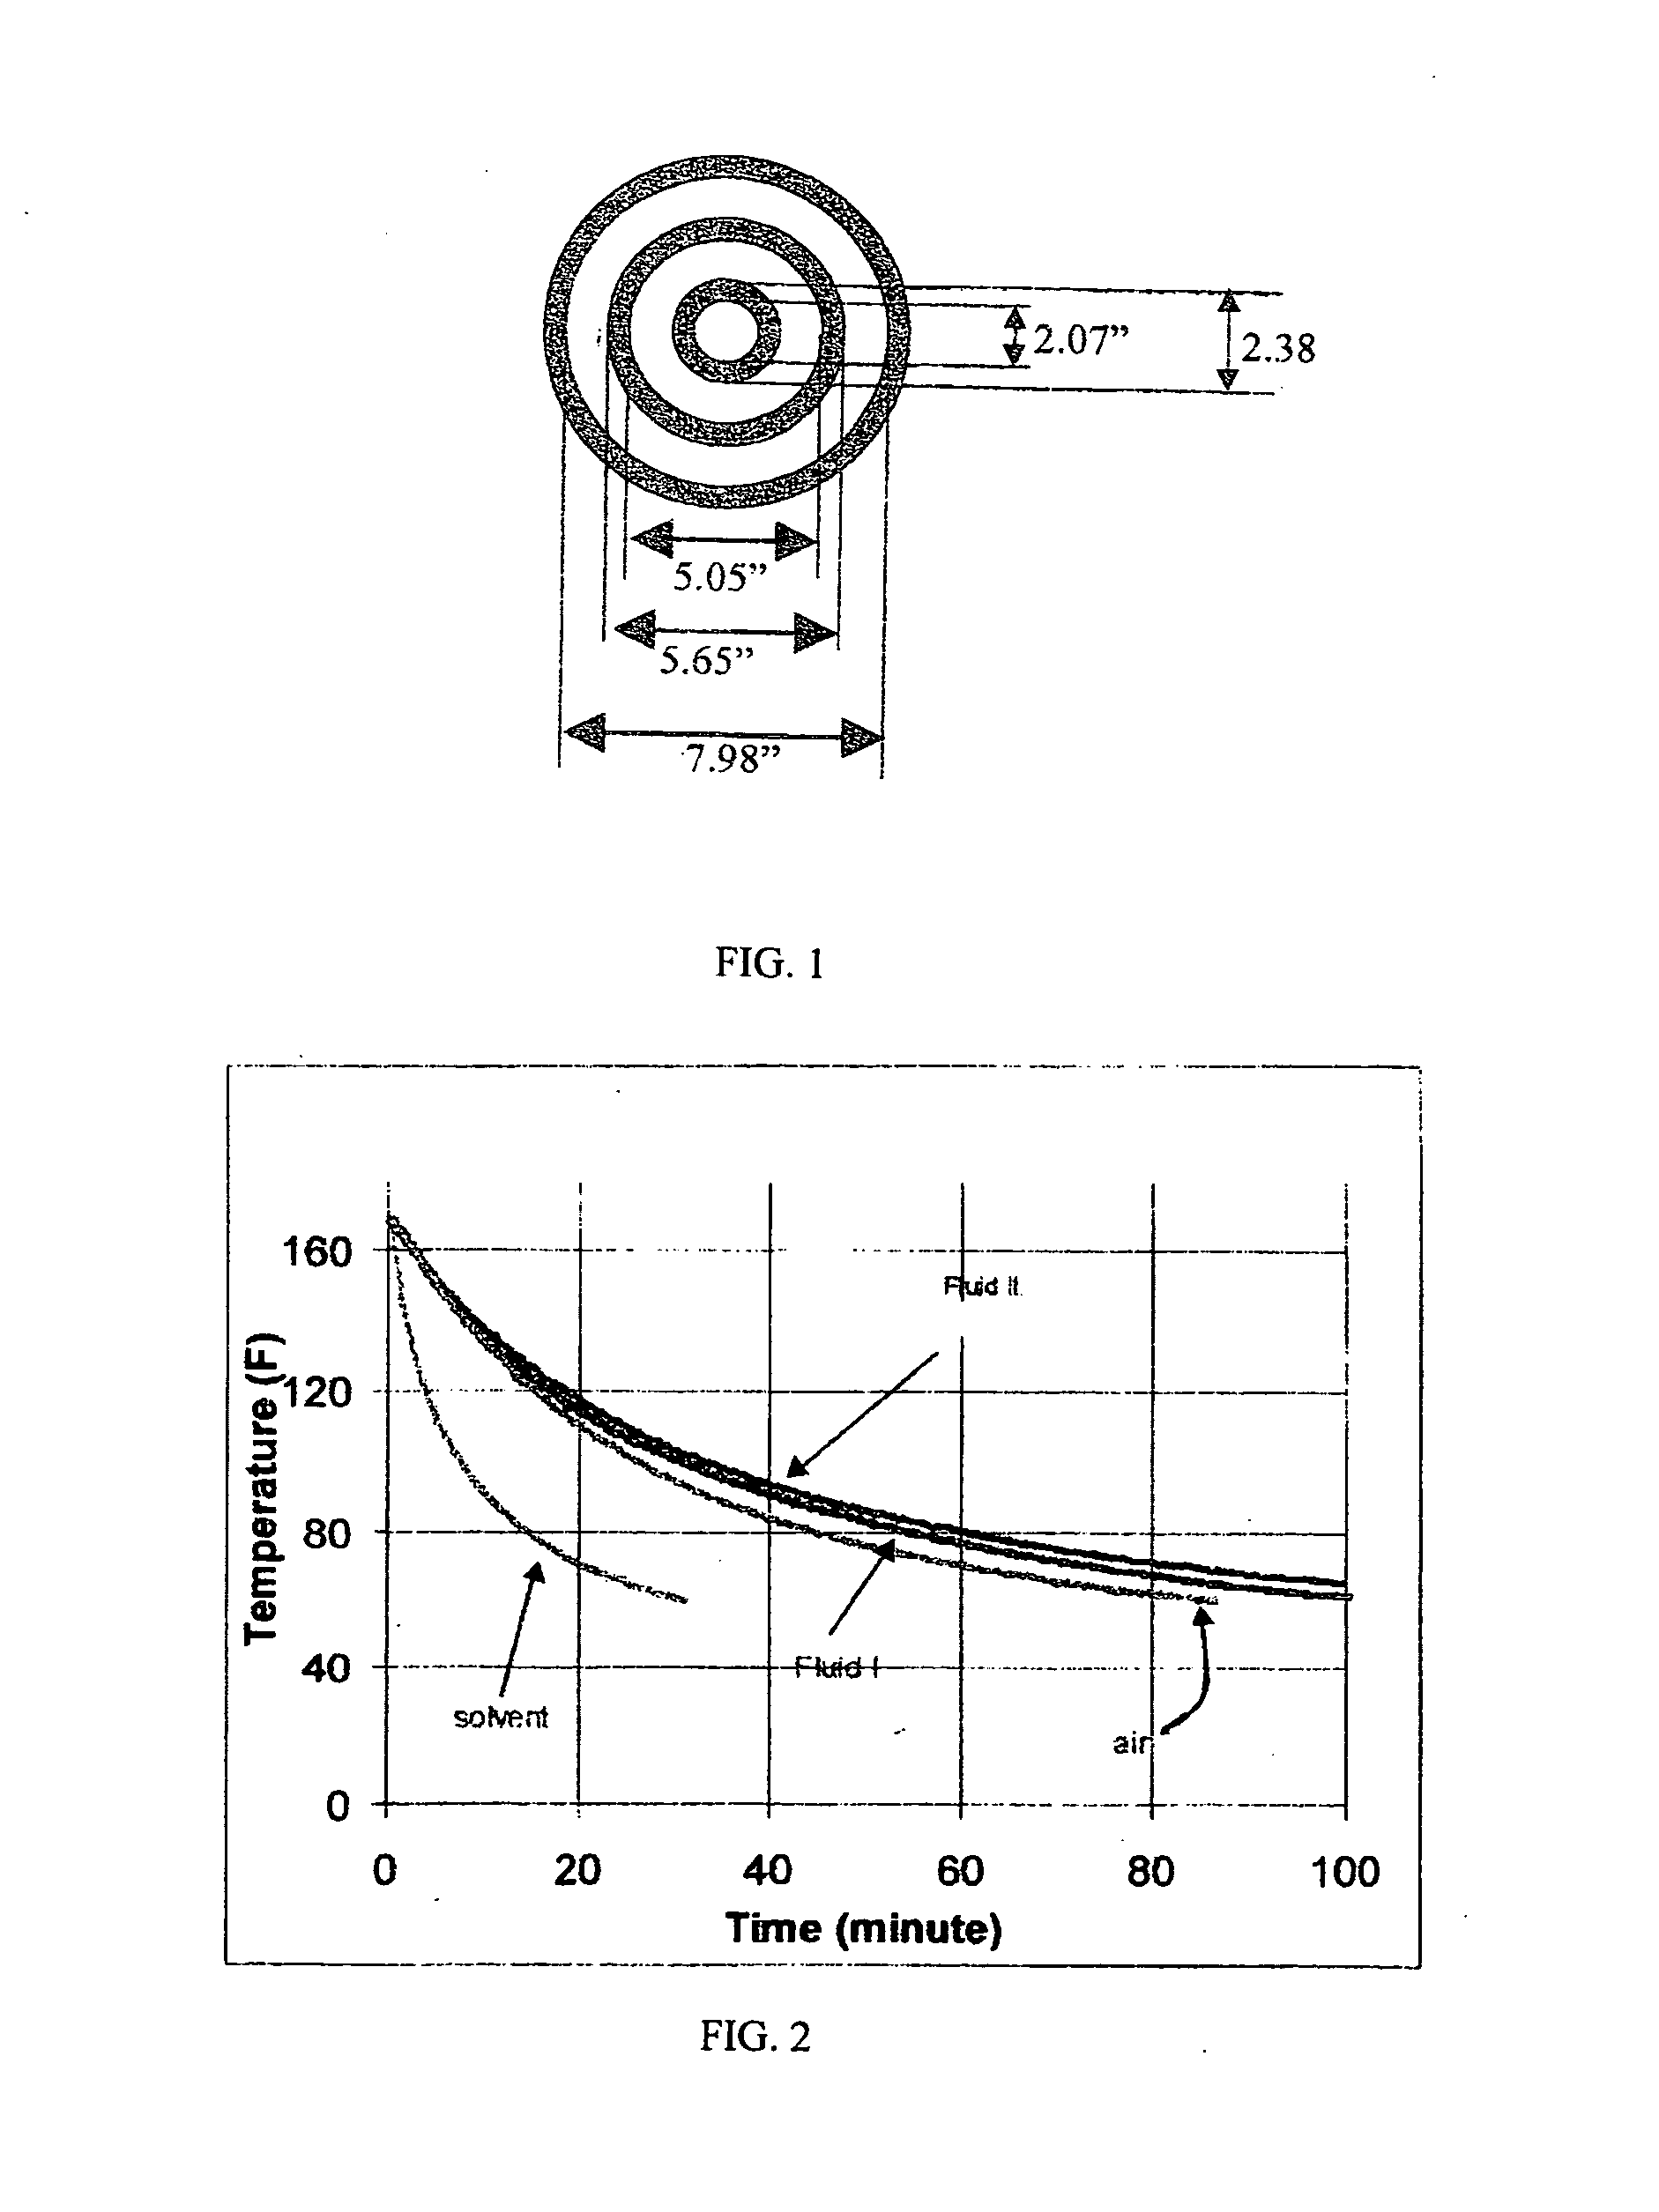 Thermal insulation compositions containing organic solvent and gelling agent and methods of using the same